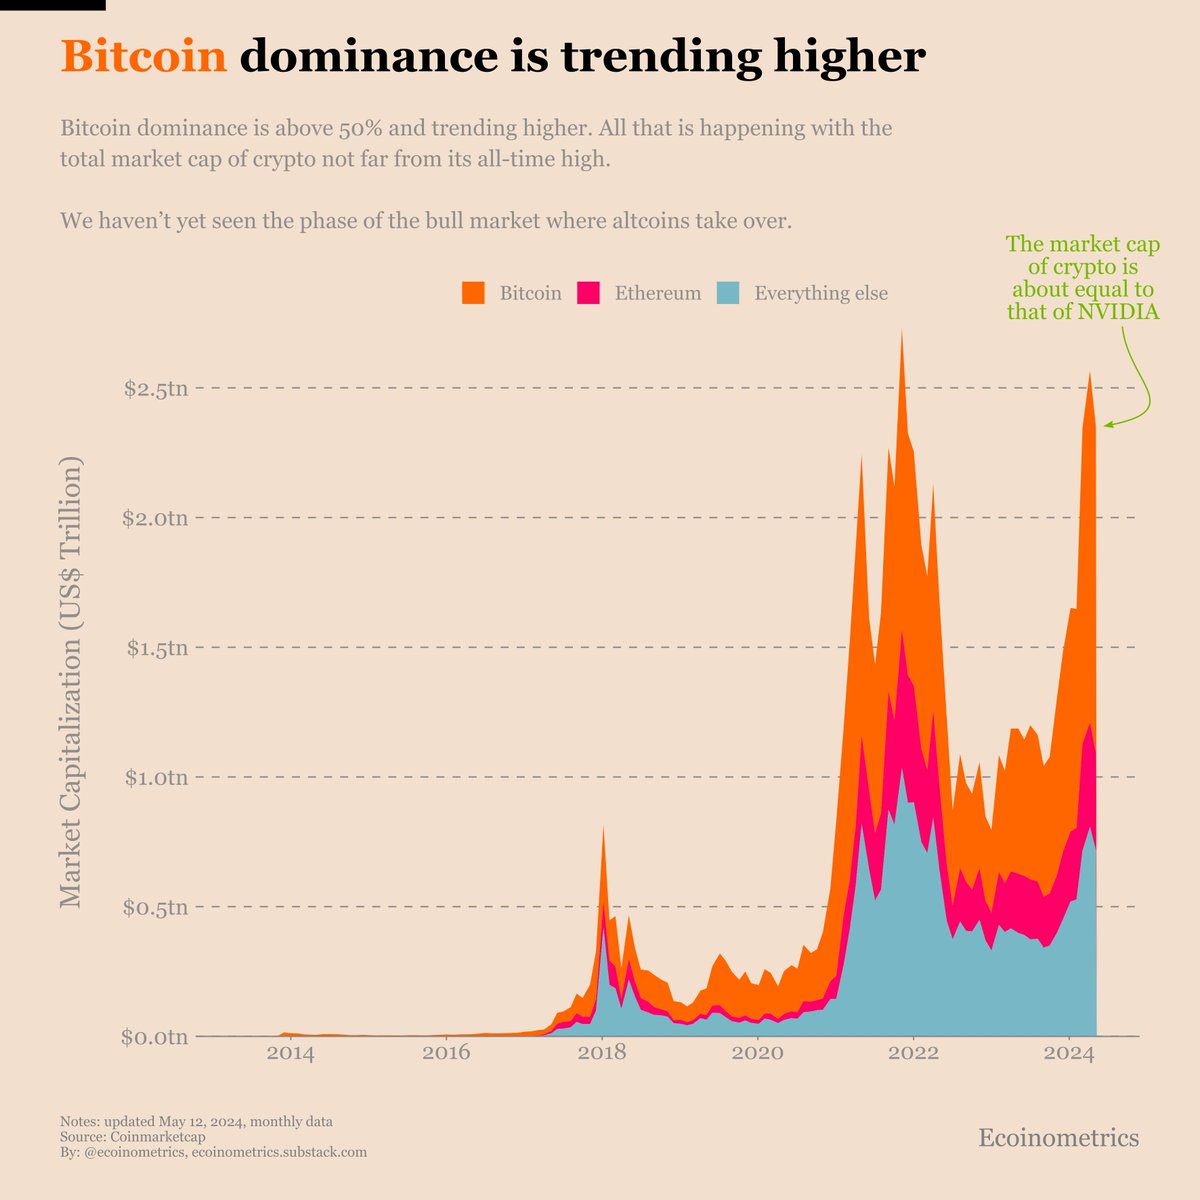 Bitcoin dominance is above 50% and trending higher.

That’s happening at the same time as the total market cap of crypto is close to its all-time high.

And we haven’t yet seen the phase of the bull market where altcoins take over.